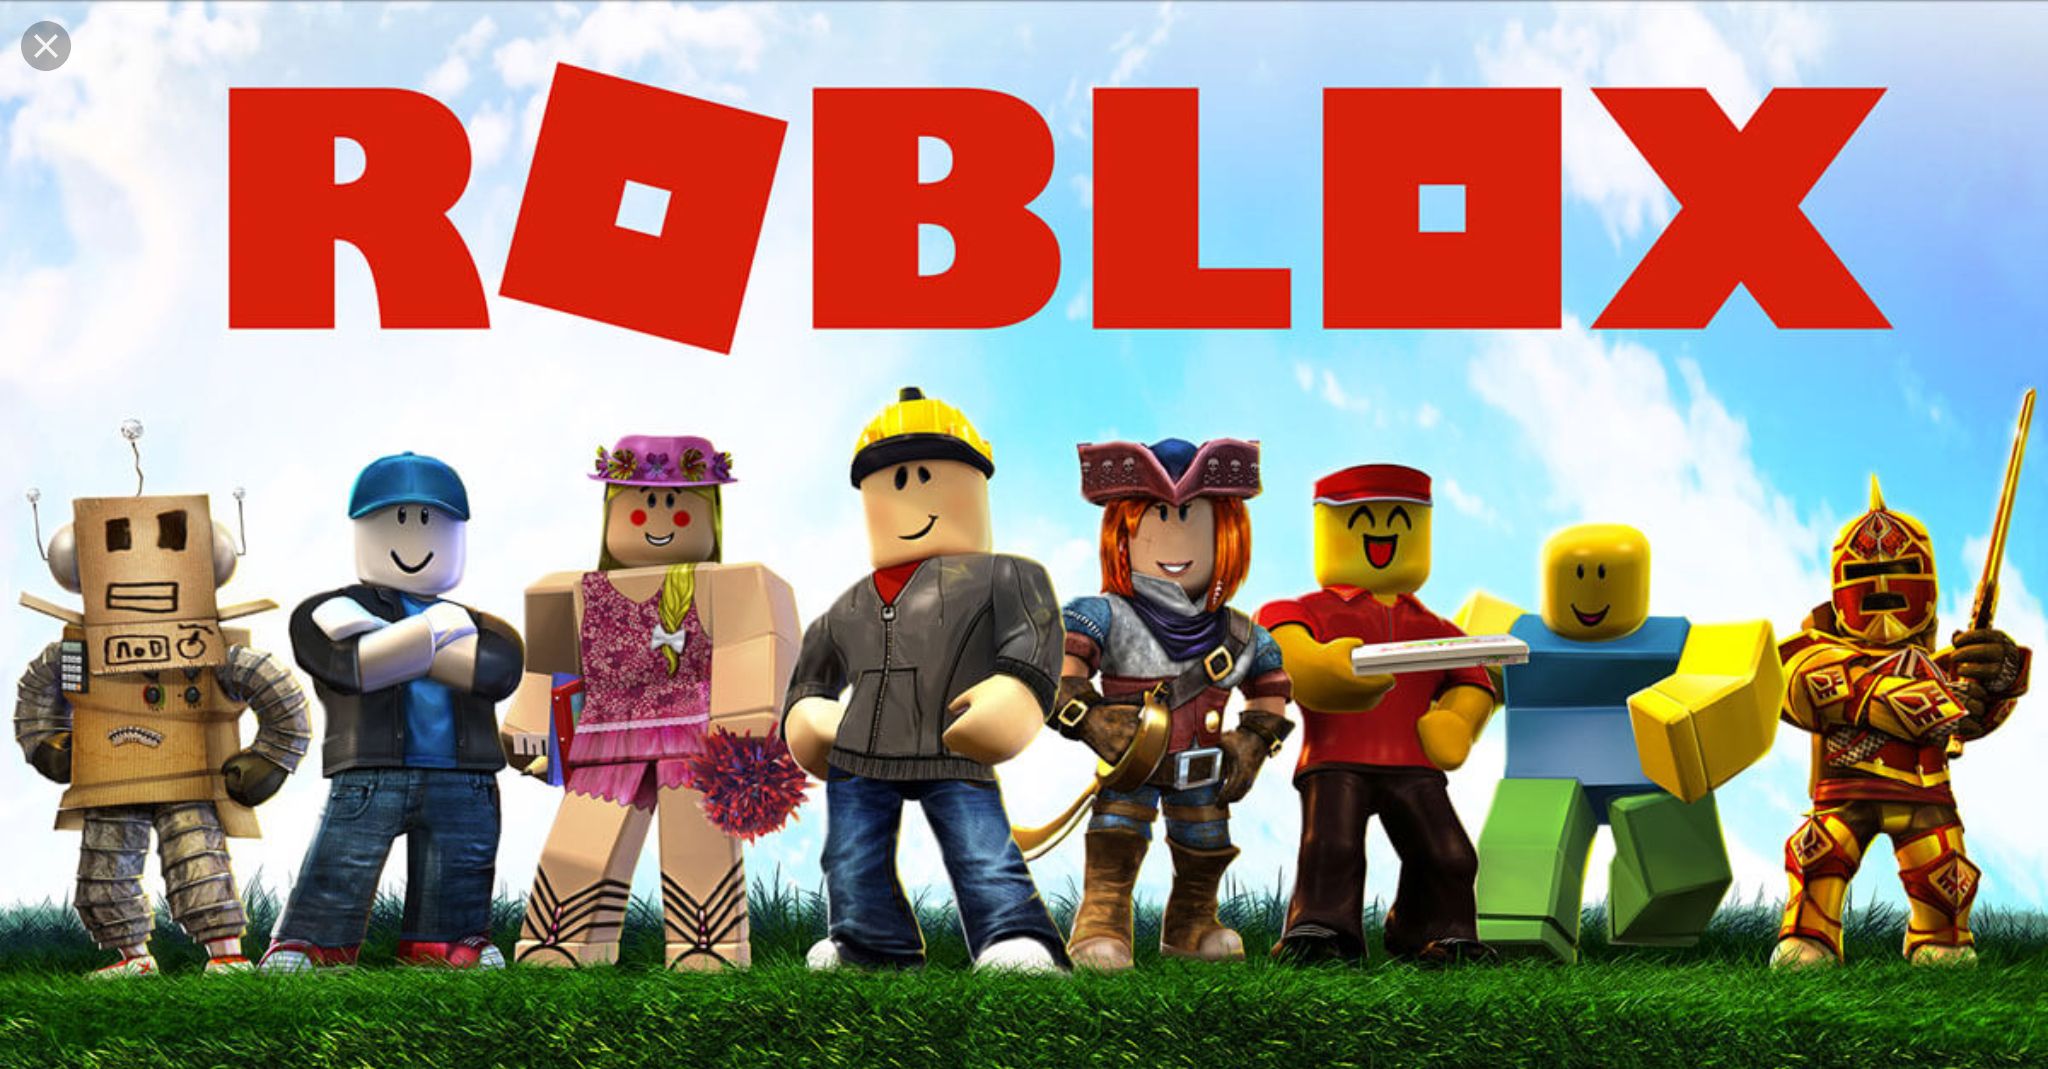 Roblox Wallpaper Awesome HD